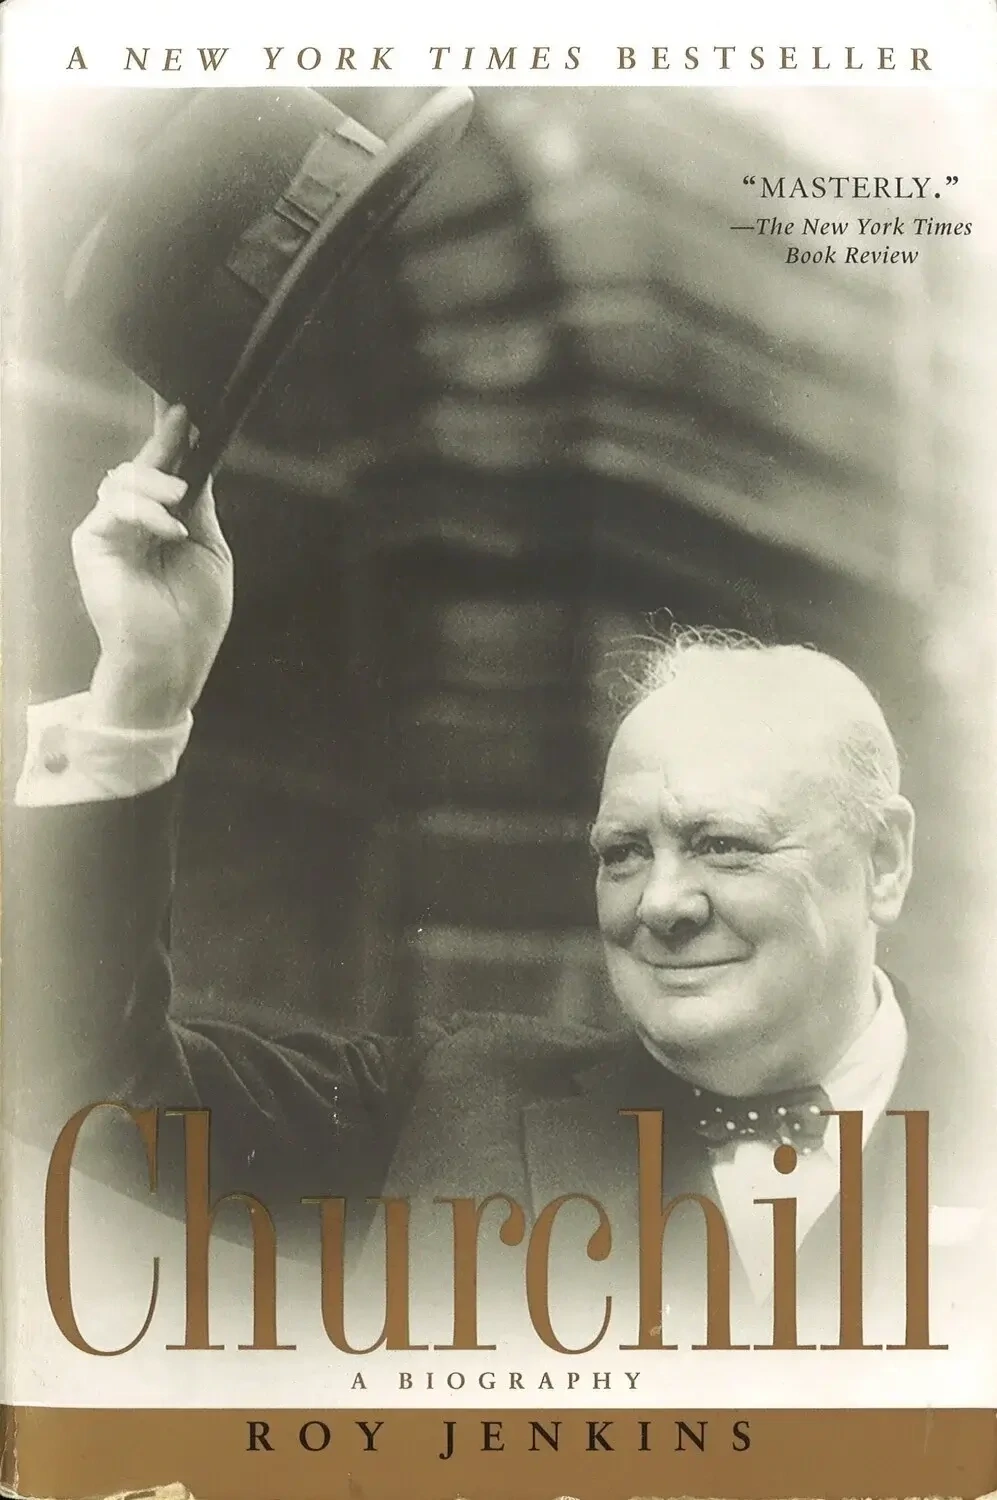 Churchill: A Biography by Roy Jenkins